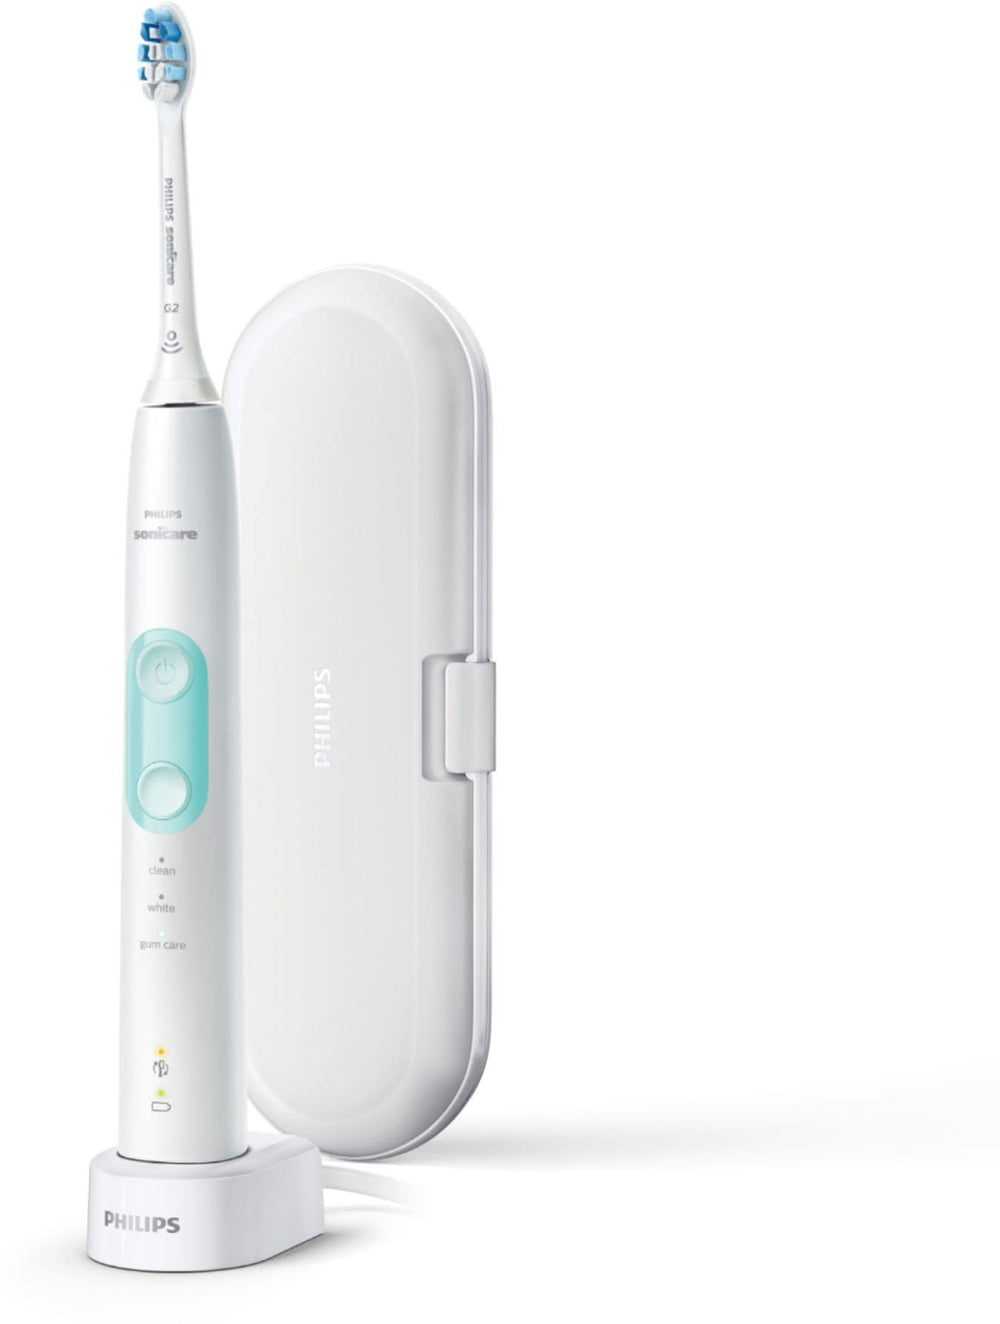 Philips Sonicare - ProtectiveClean 5100 Rechargeable Toothbrush - White_1